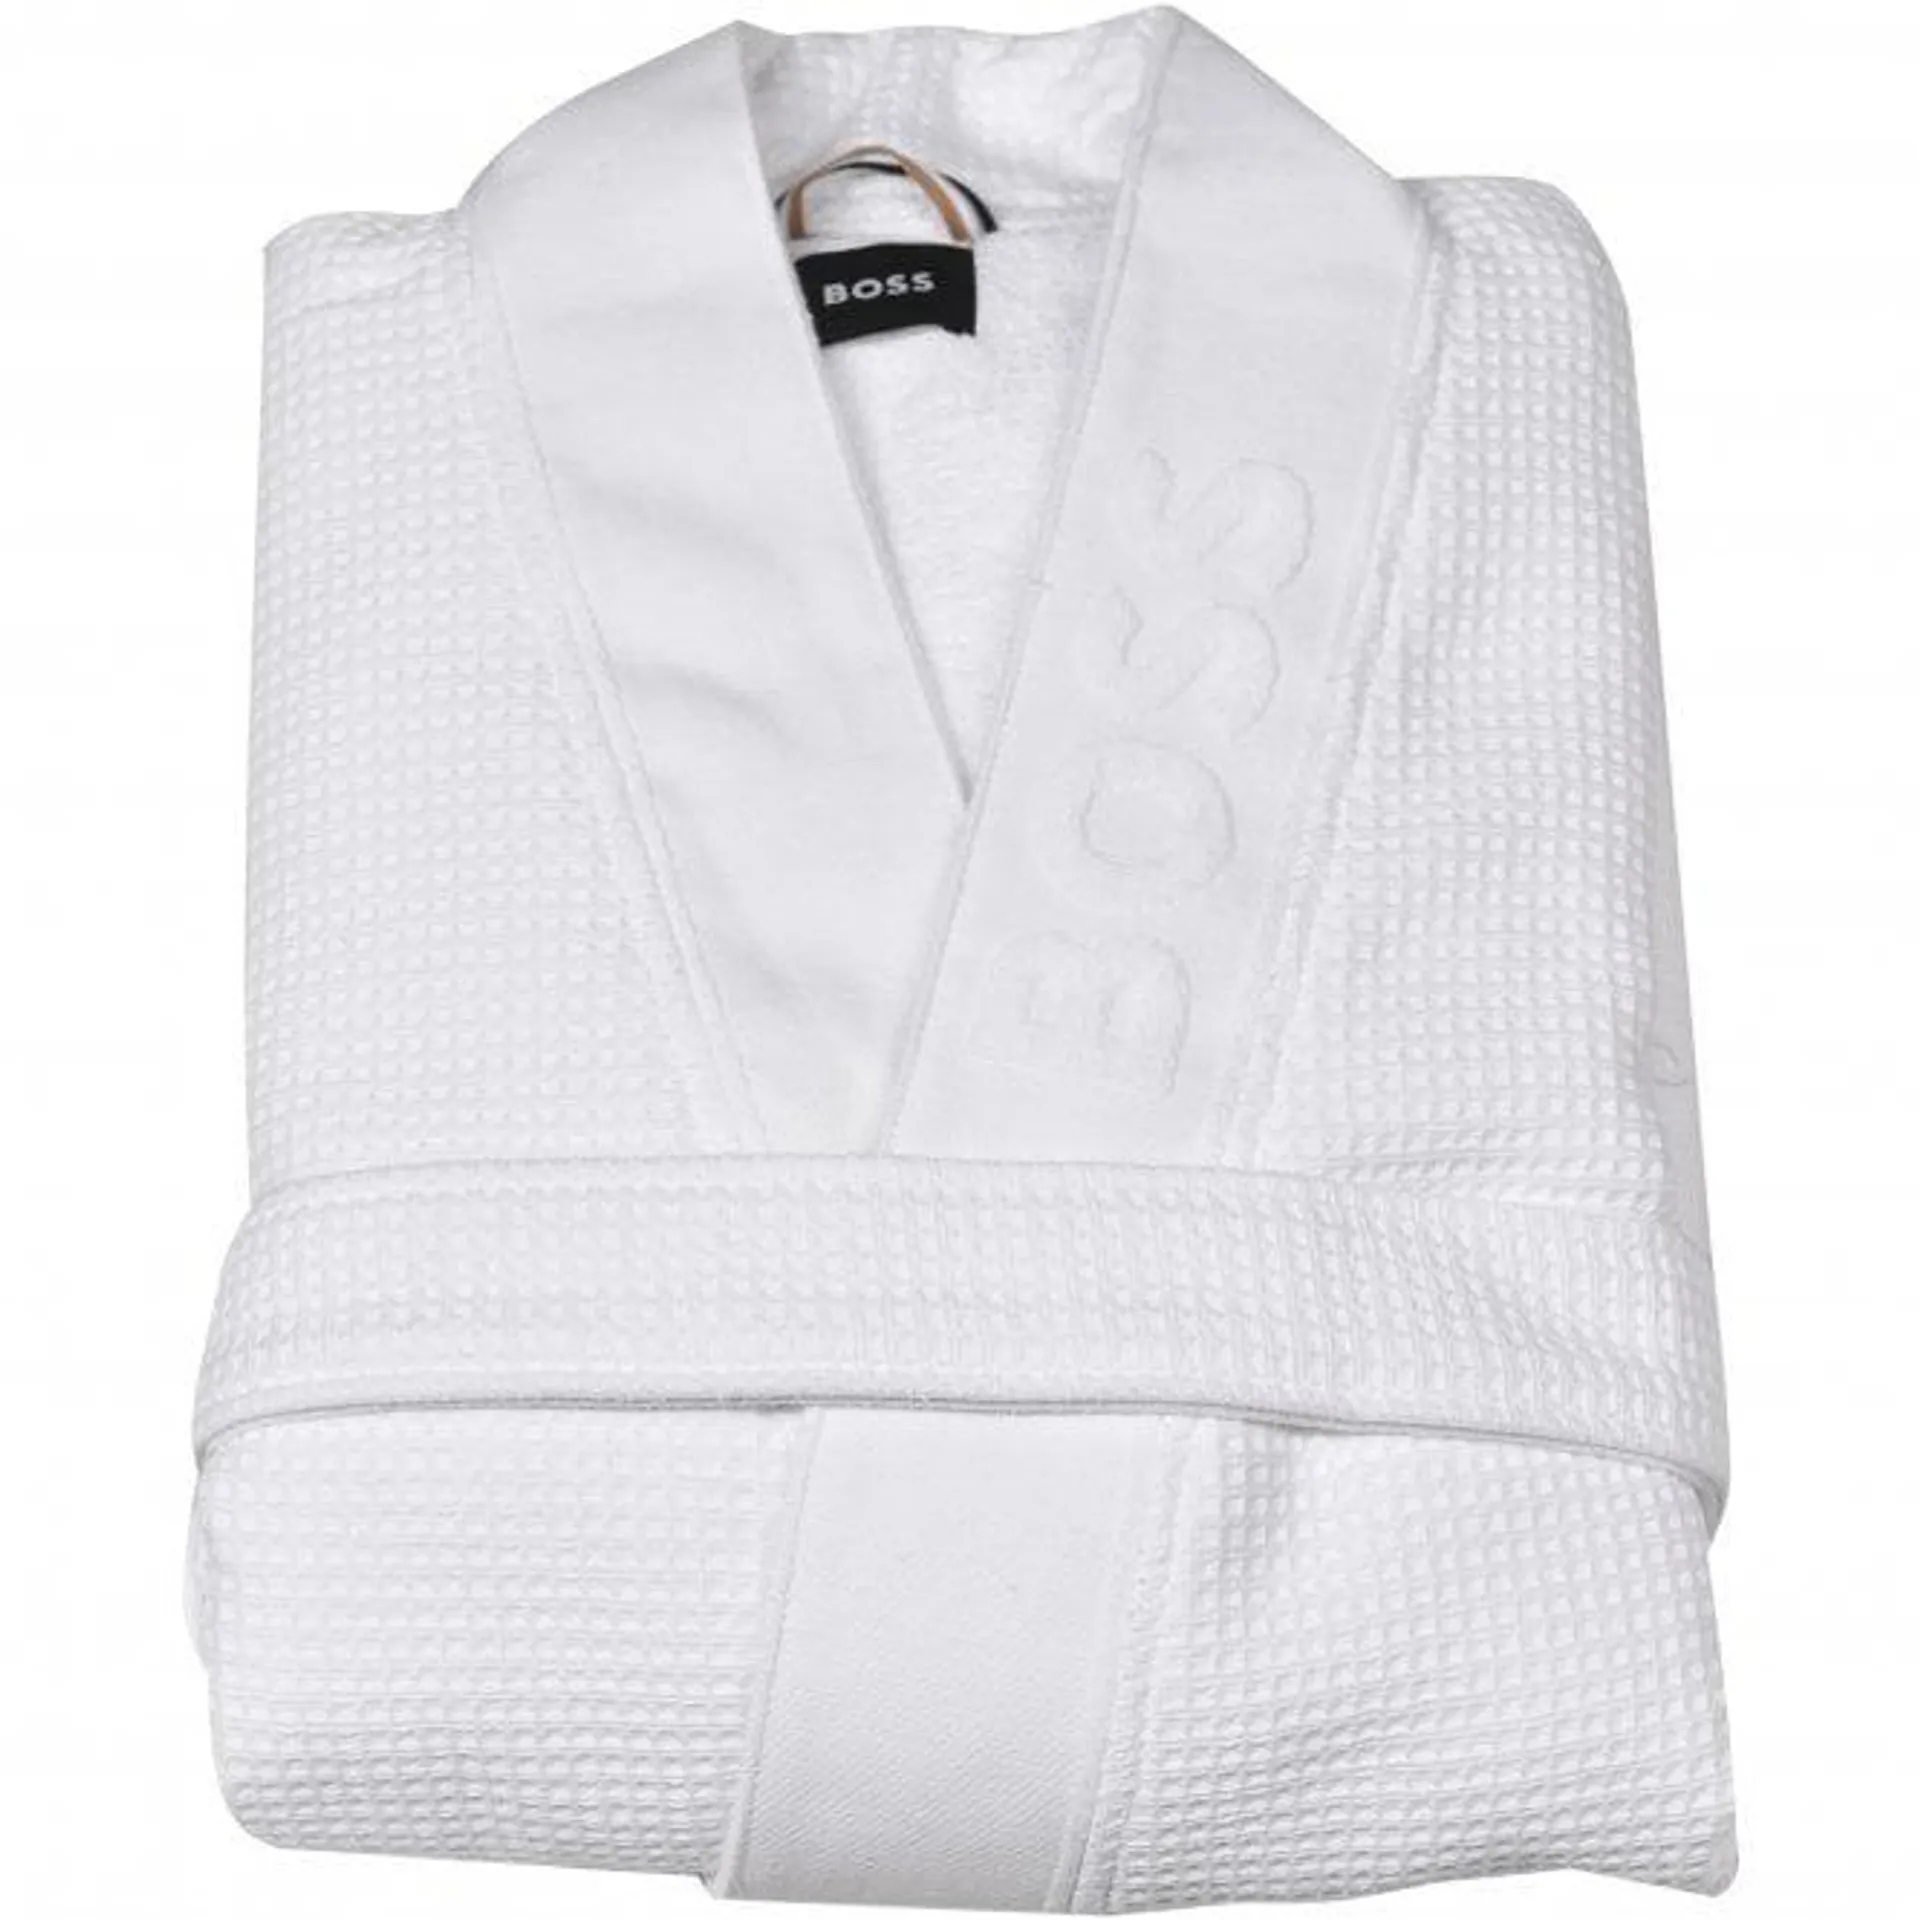 Kimono Luxe Waffle Towelling Dressing Gown, White